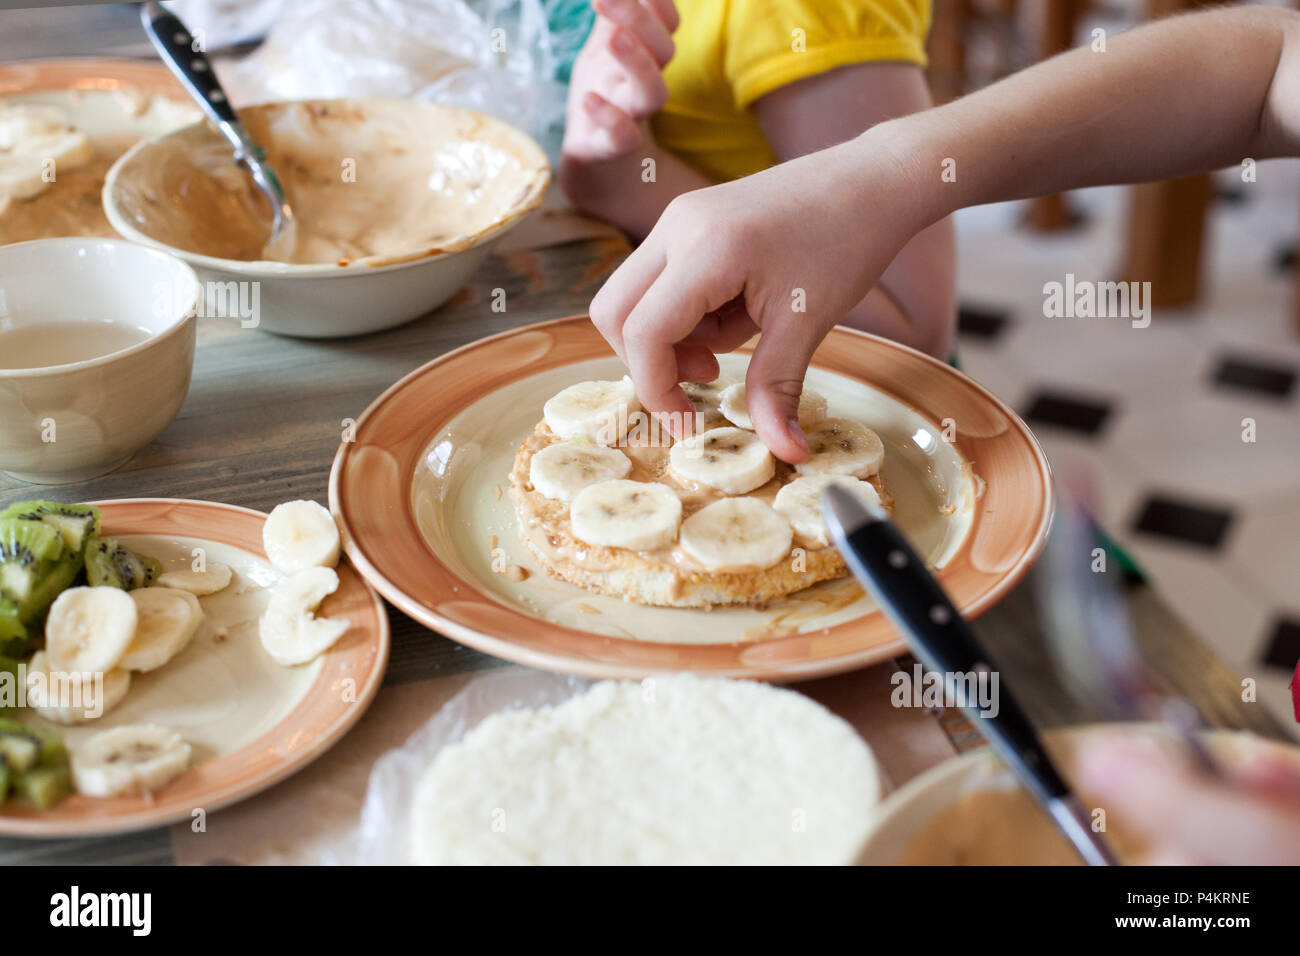 Cooking class, culinary. Food and people concept, child hands in process cooking of sweet cake. Stock Photo